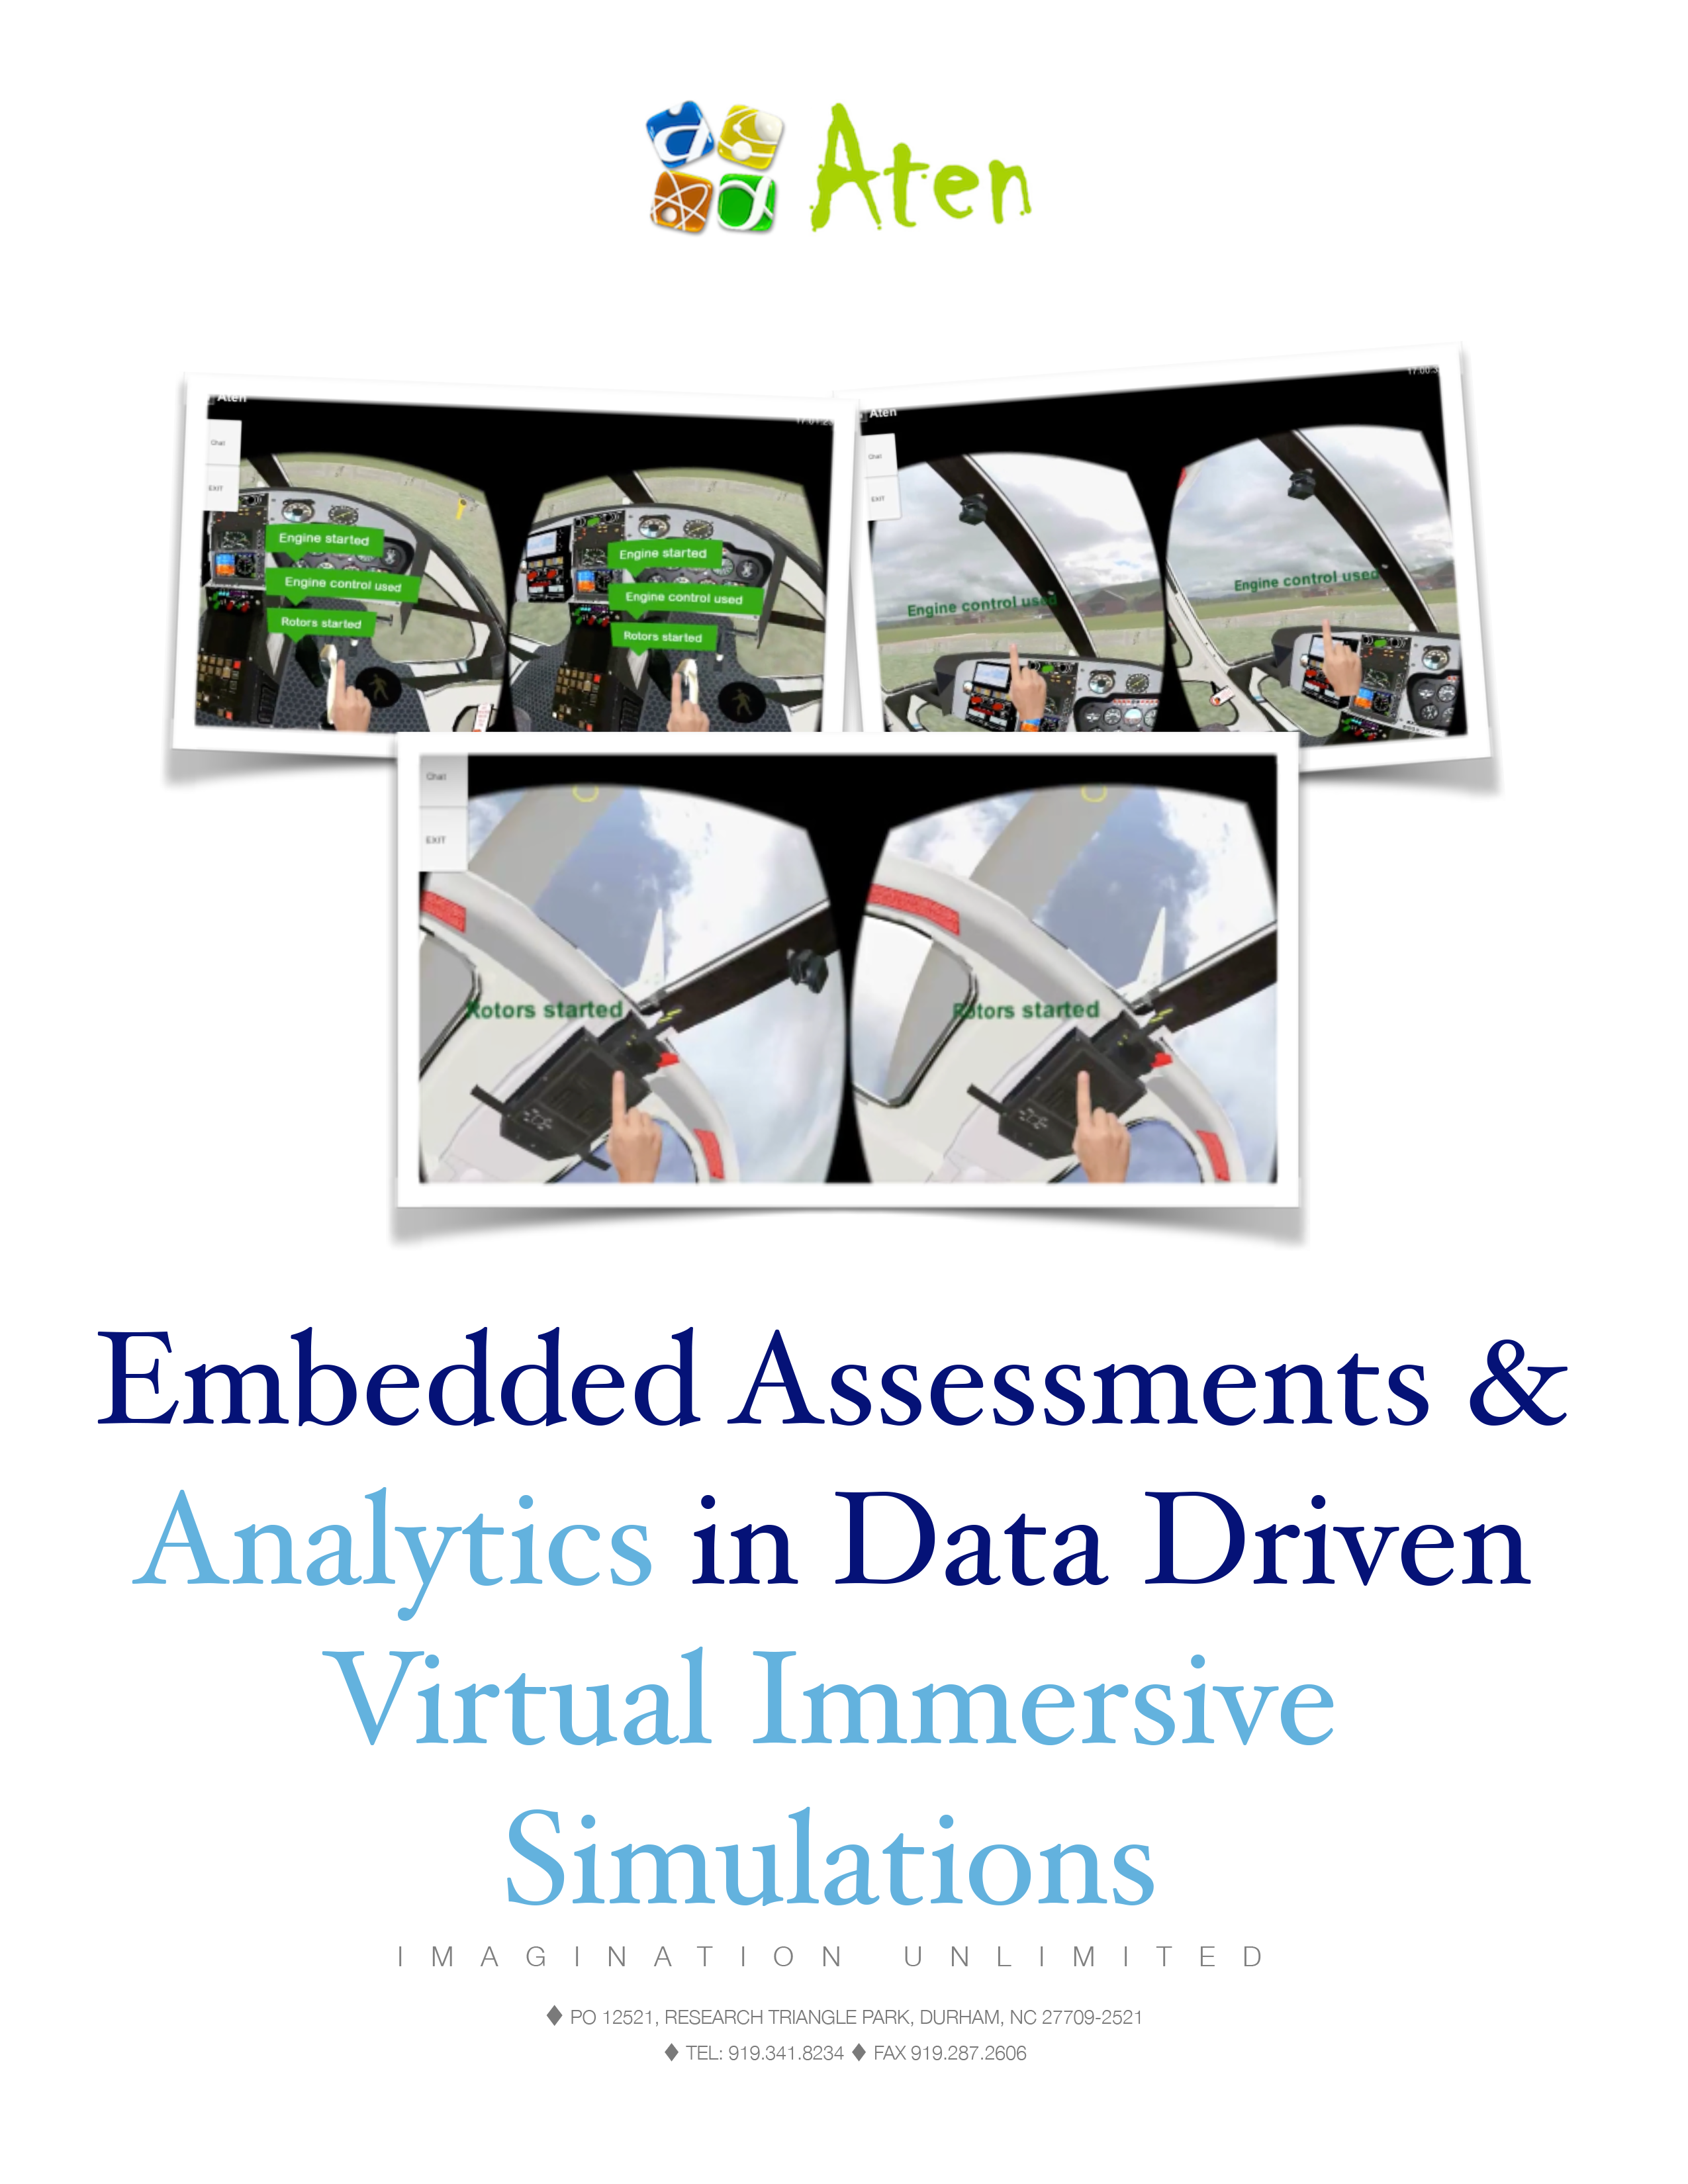 Embedded Assessments & AI Analytics in Data Driven Virtual Immersive Simulations